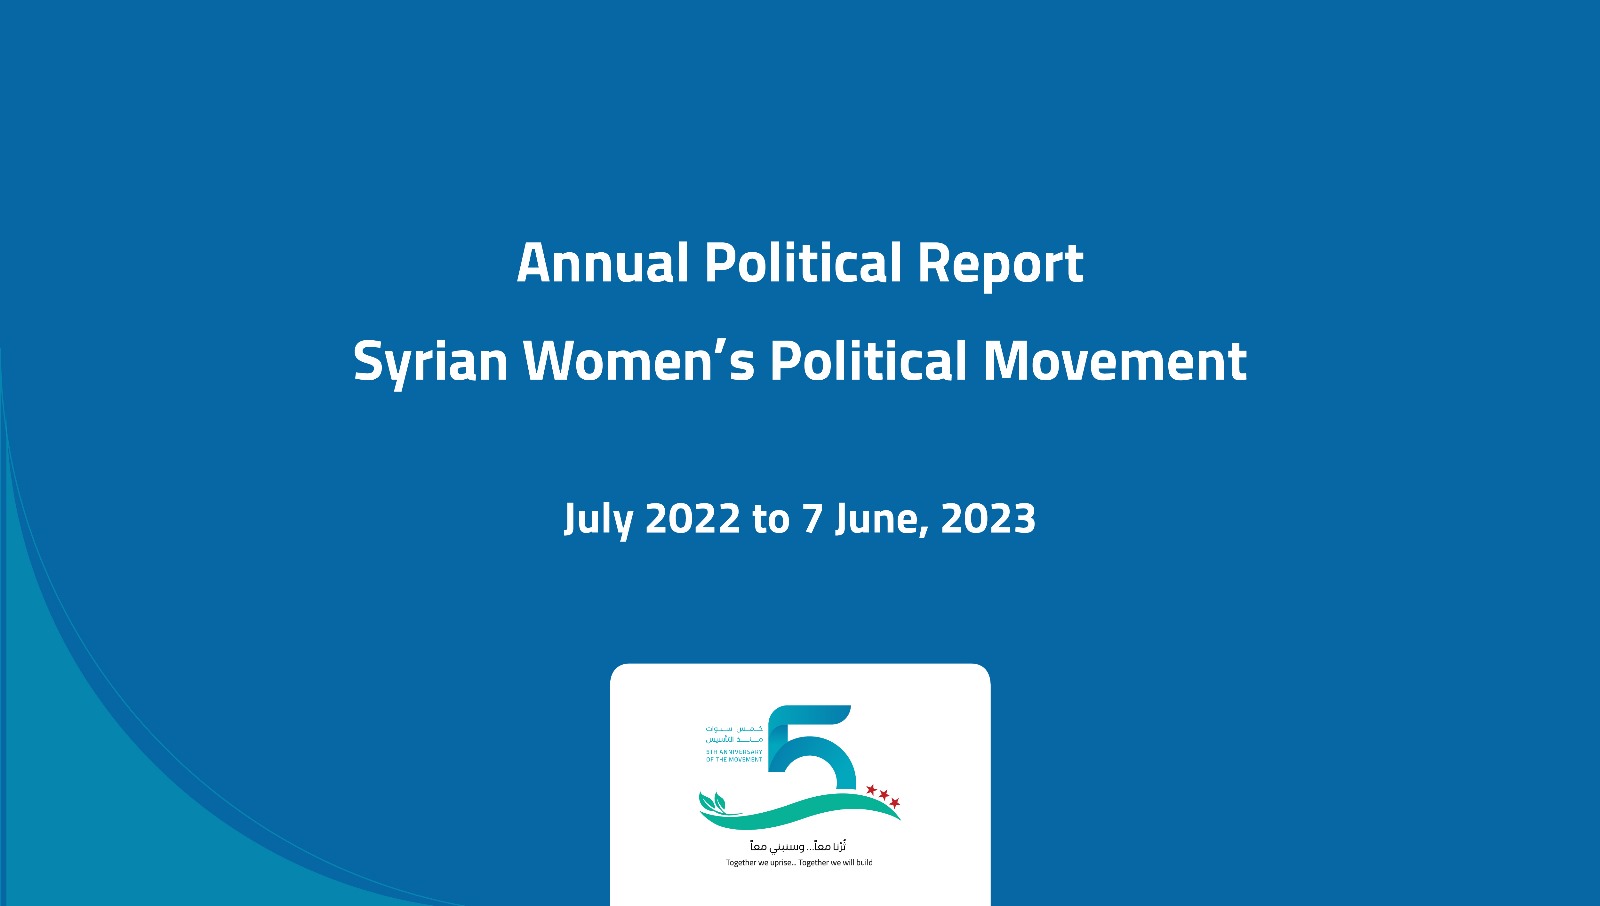 The Annual Political Report of the Syrian Women’s Political Movement 2023